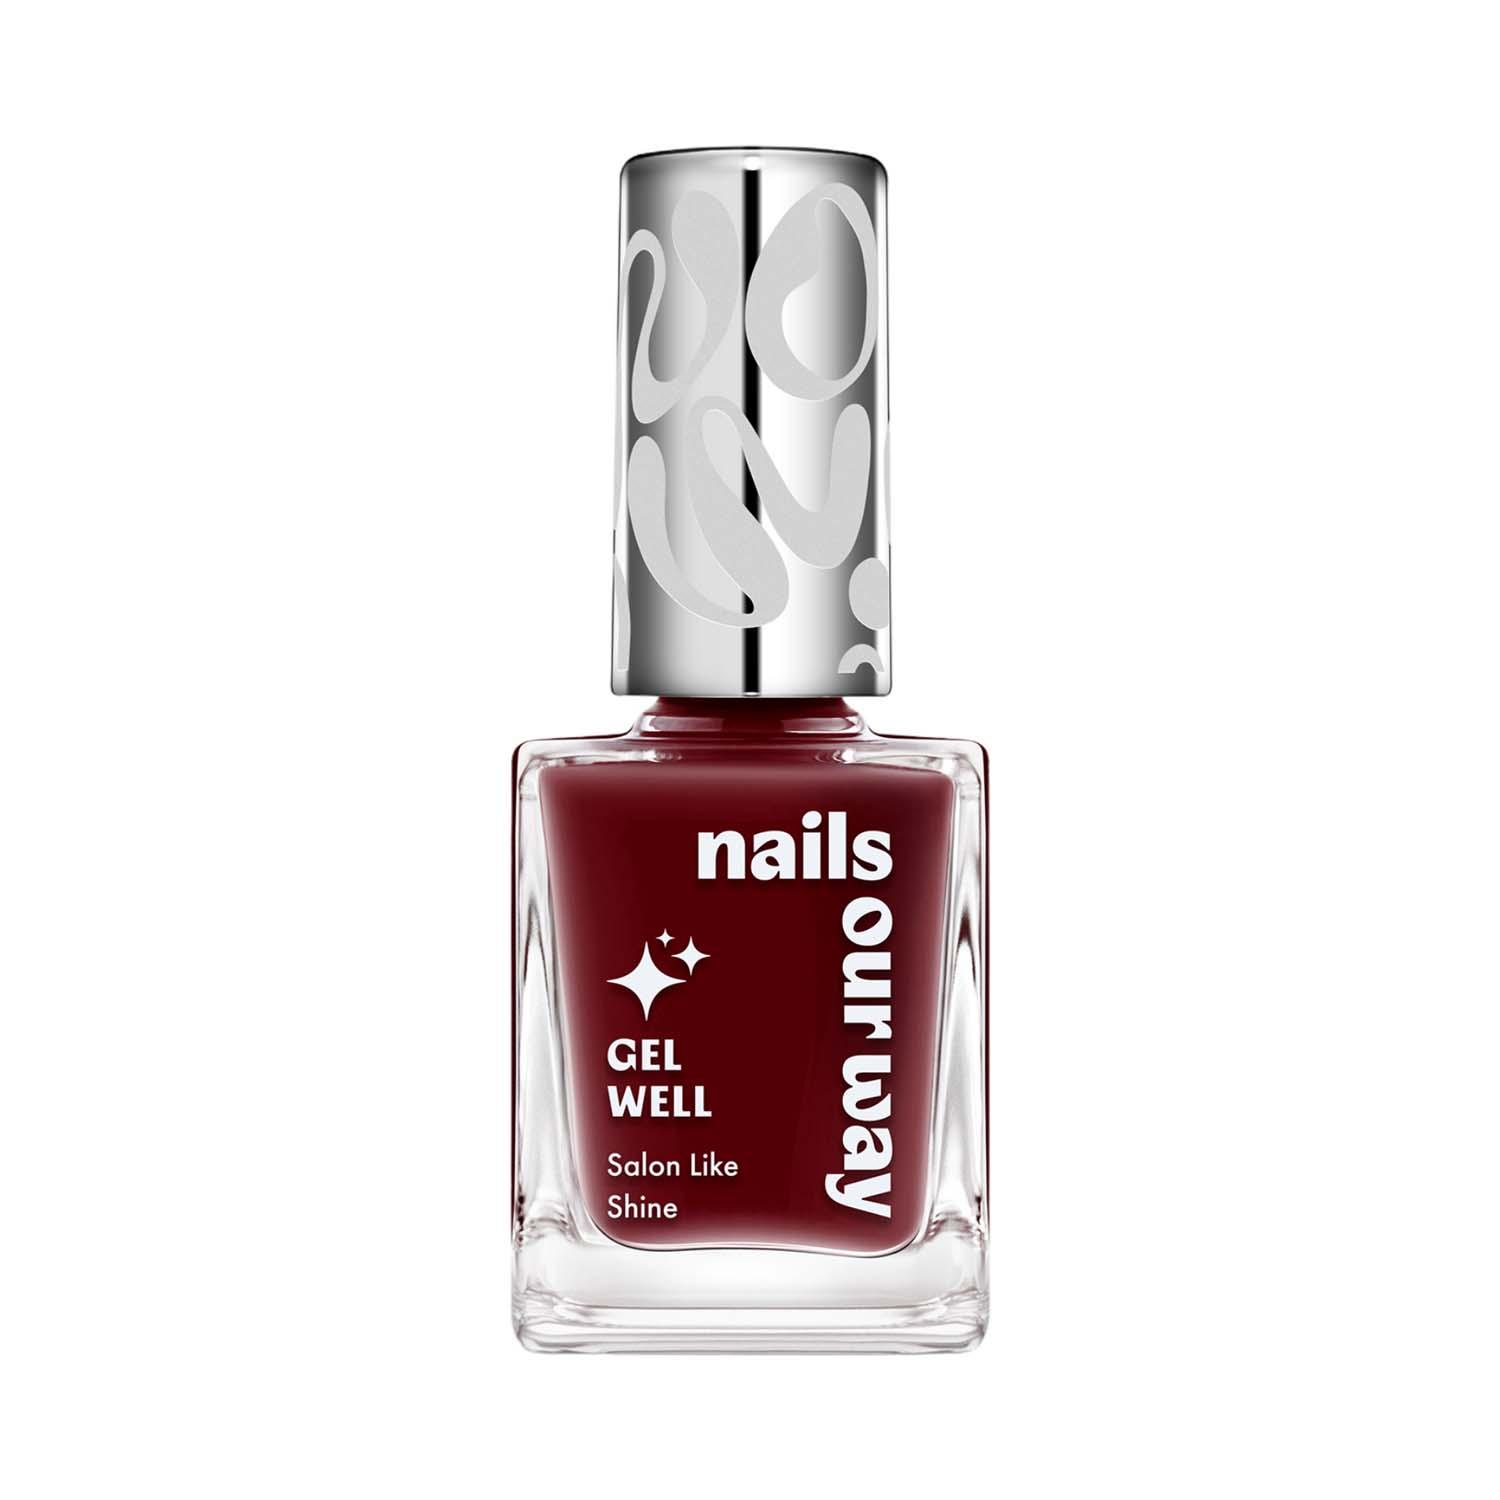 Nails Our Way | Nails Our Way Gel Well Nail Enamel - 107 Magnetic (10 ml)